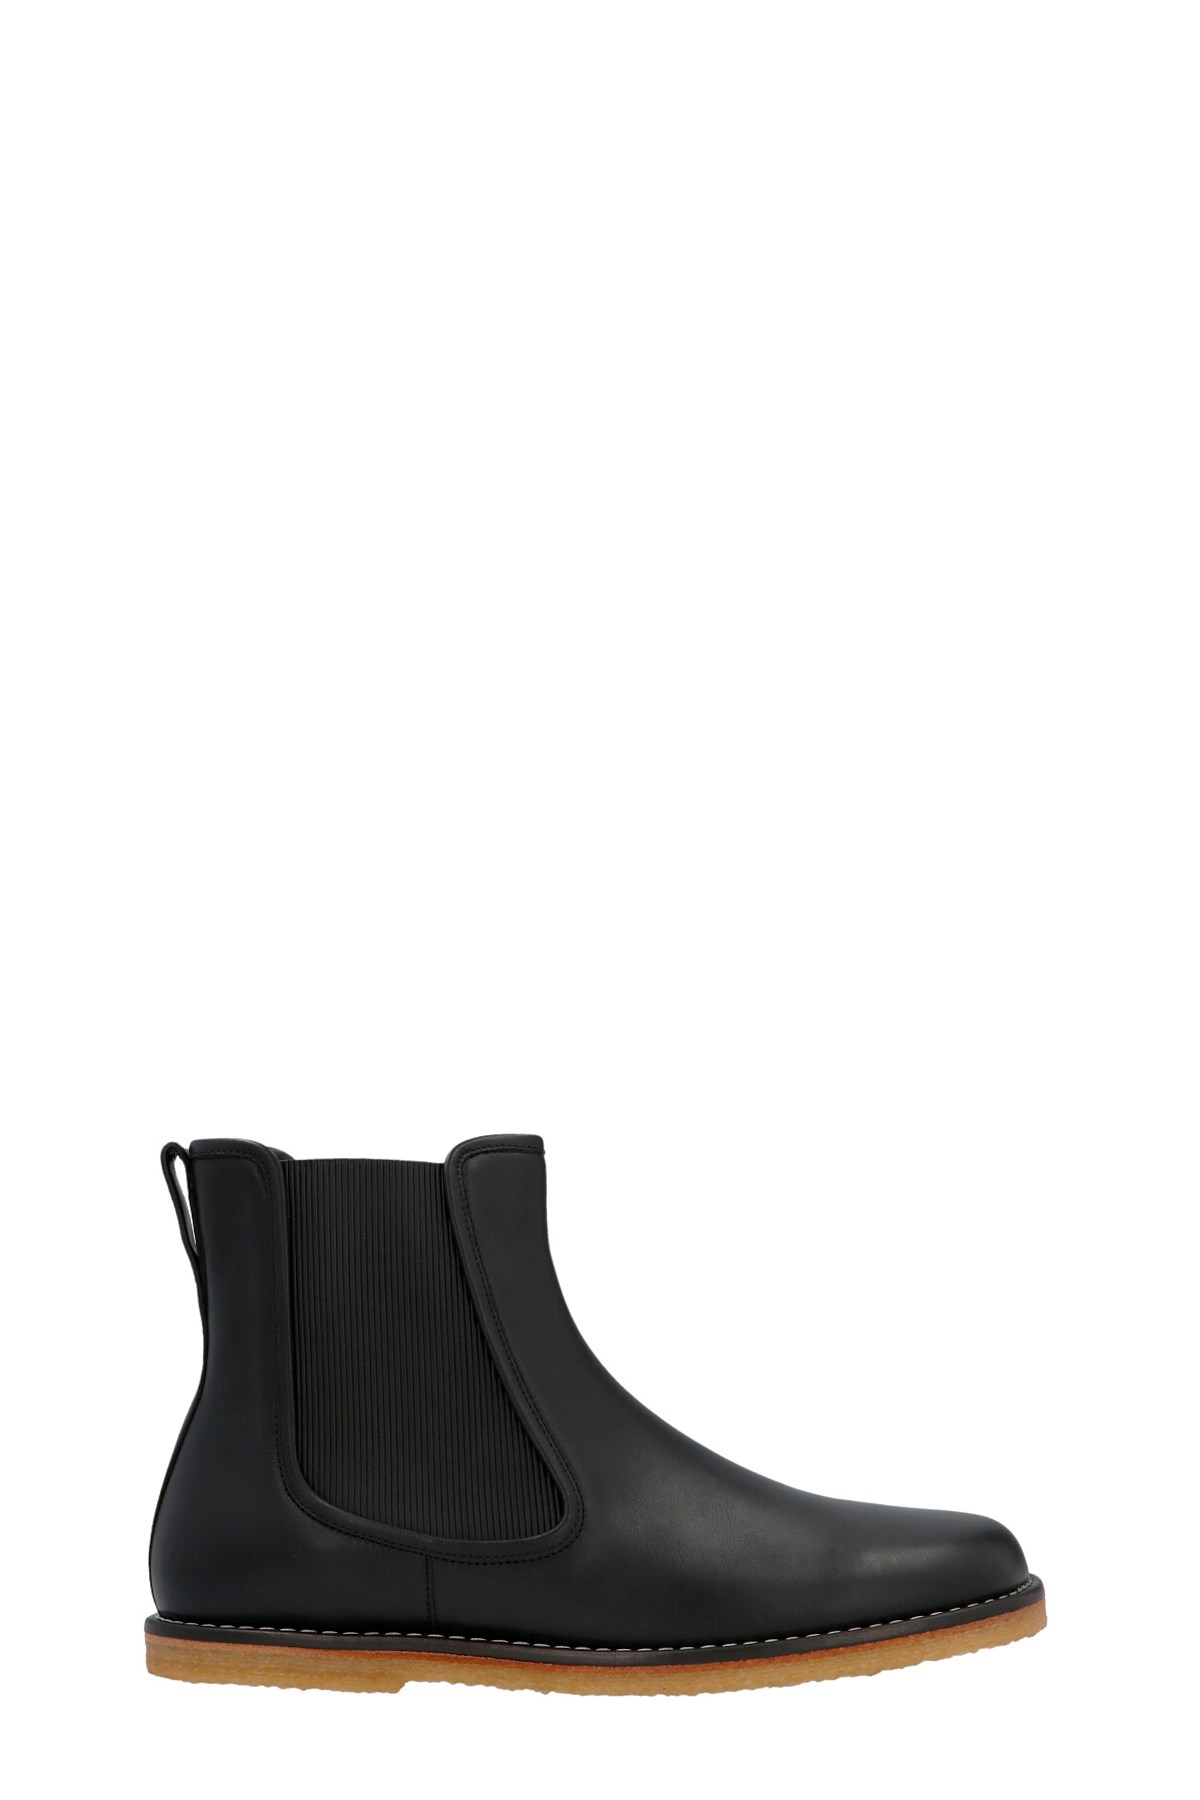 LOEWE 'Chelsea Boot' Ankle Boots